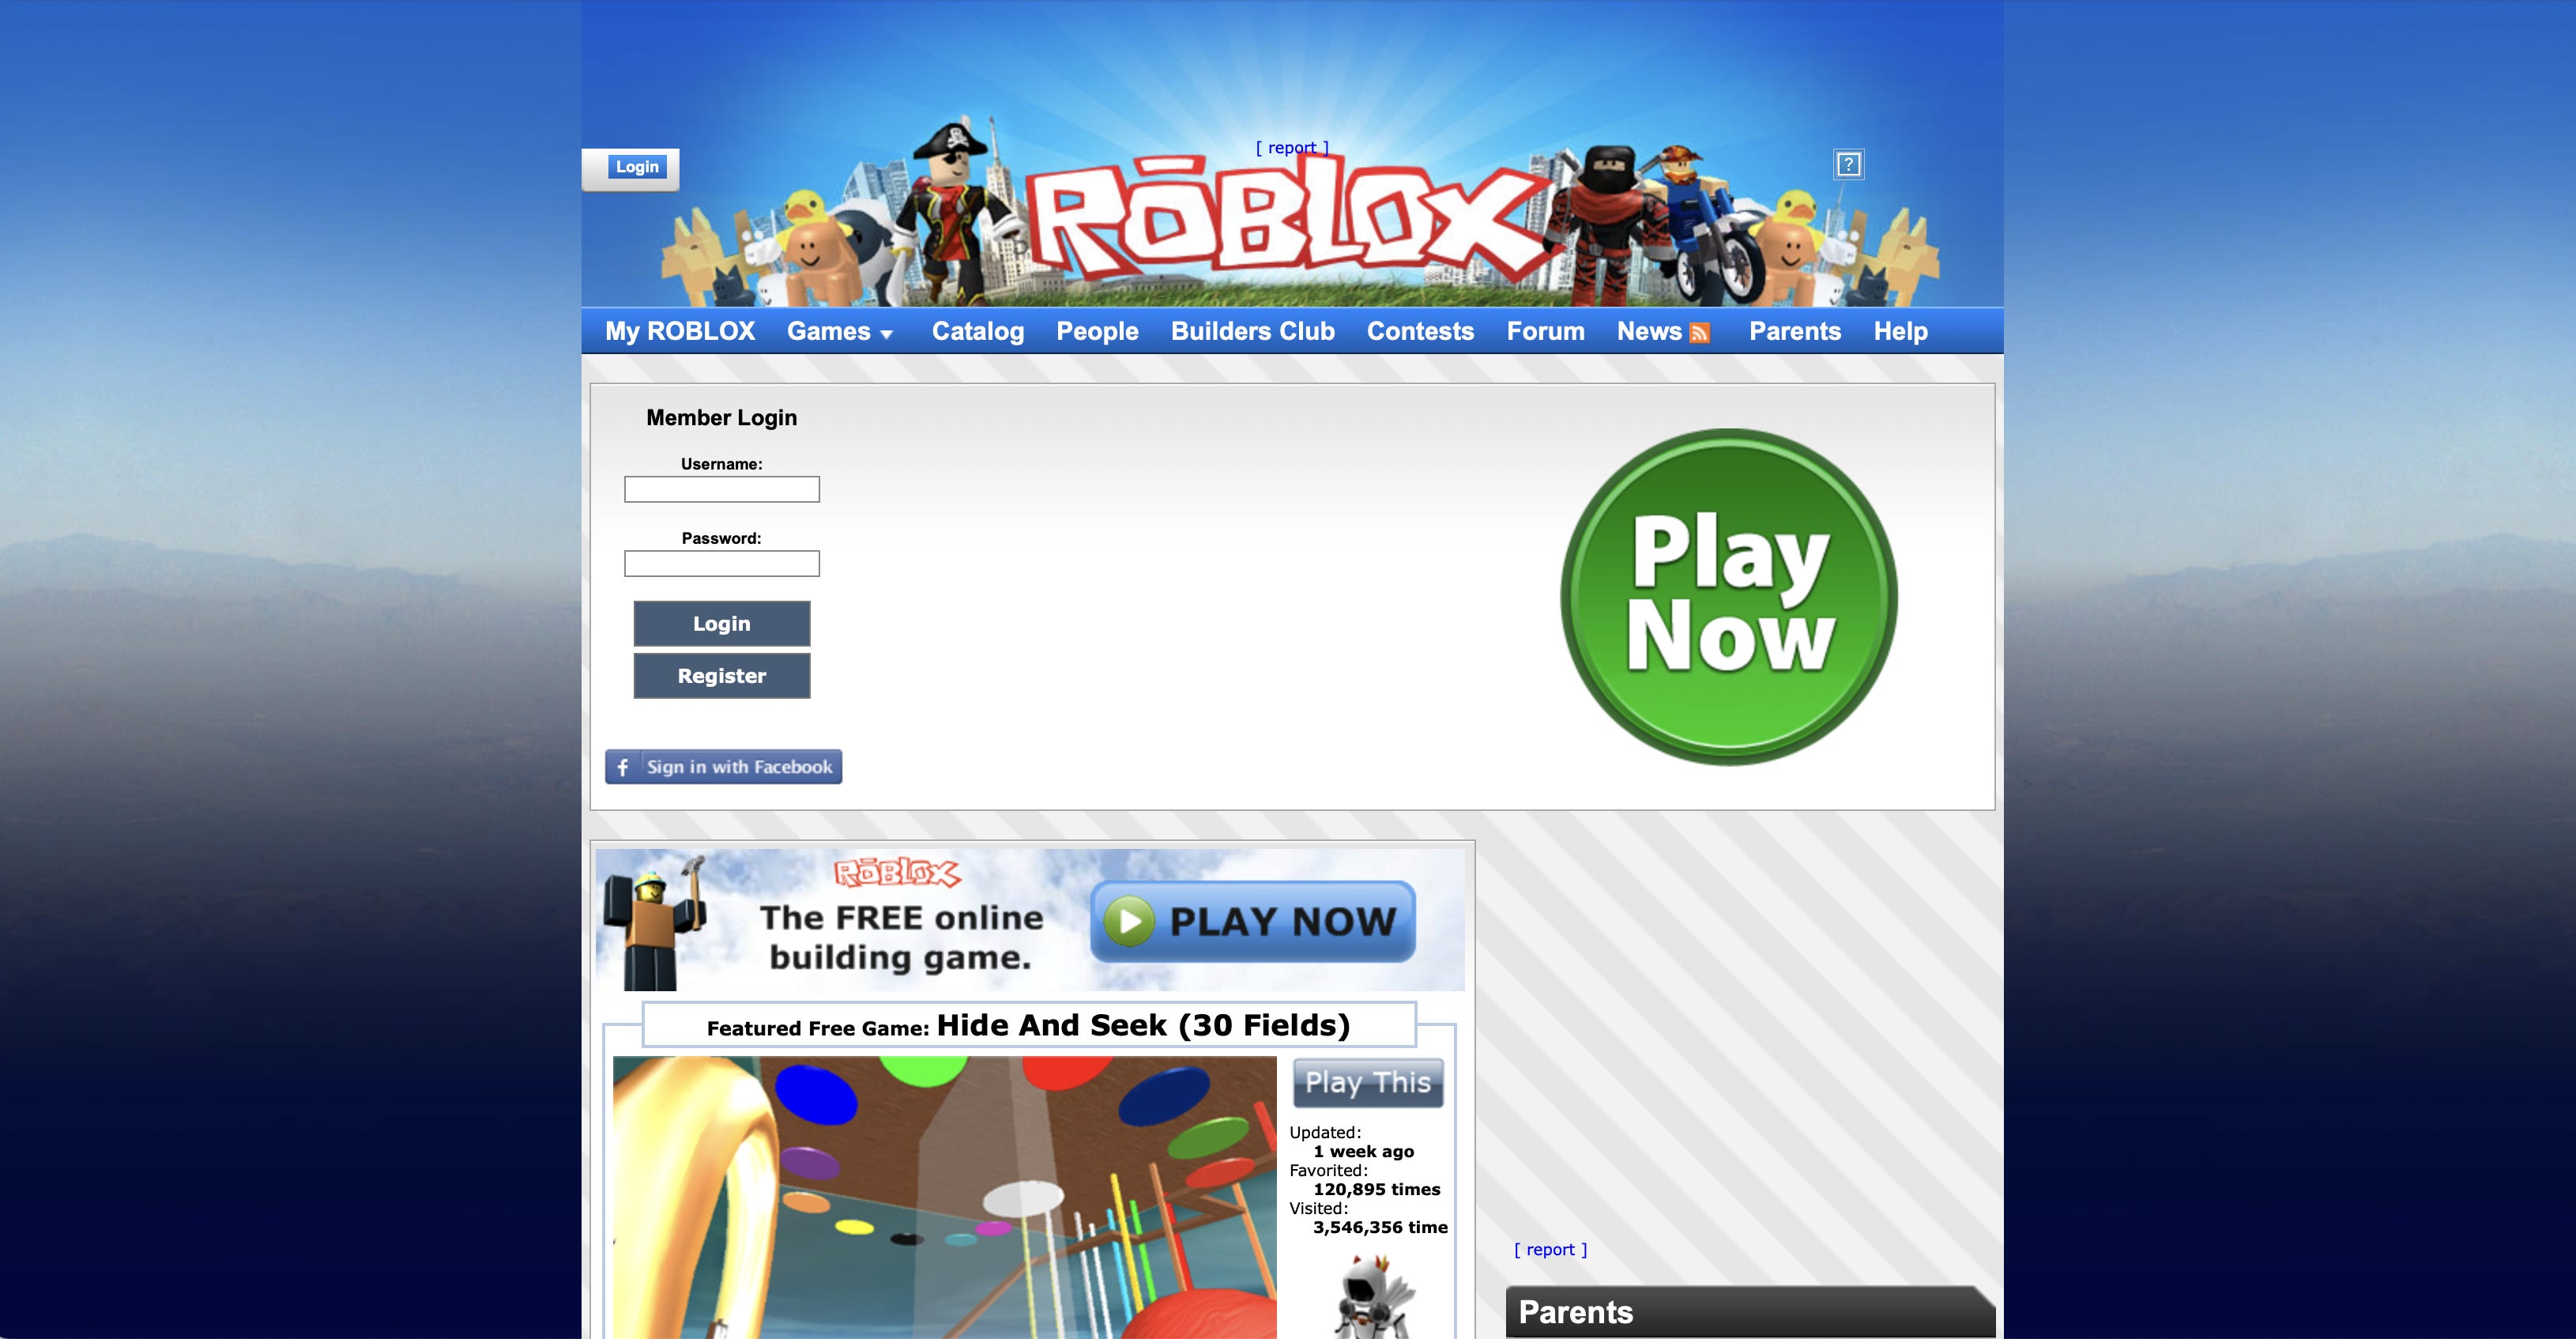 Roblox S Growth Strategies And Why Becoming A Metaverse Is A Bad Idea By Benjamin Schroeder No Ordinary Strategy - how to get 2m robux